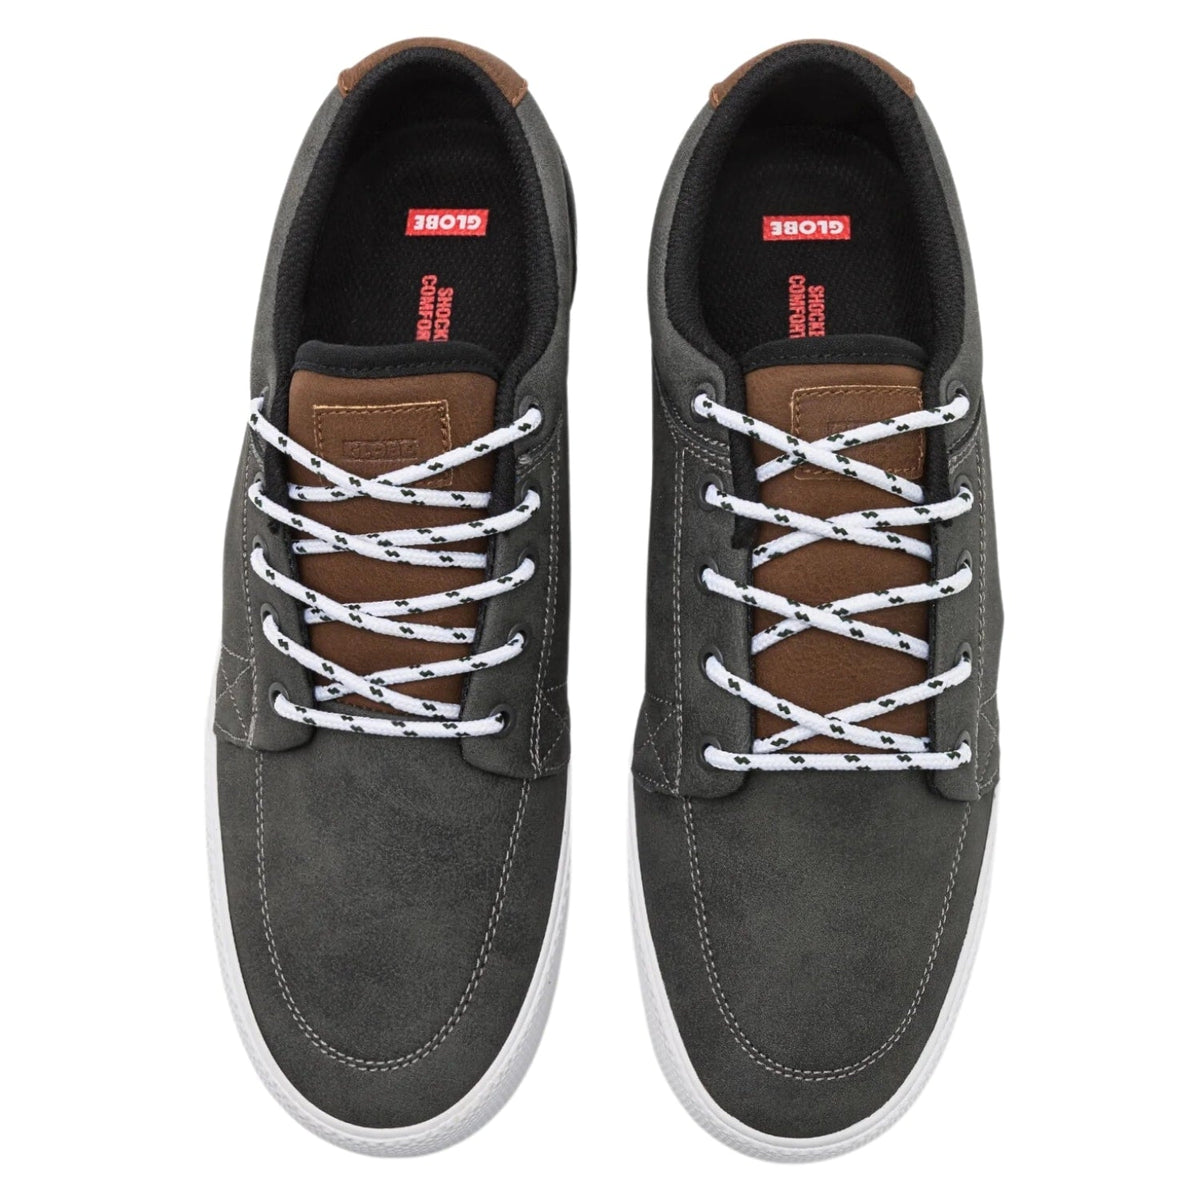 Globe GS Shoes - Grey/Distress - Mens Casual Shoes by Globe